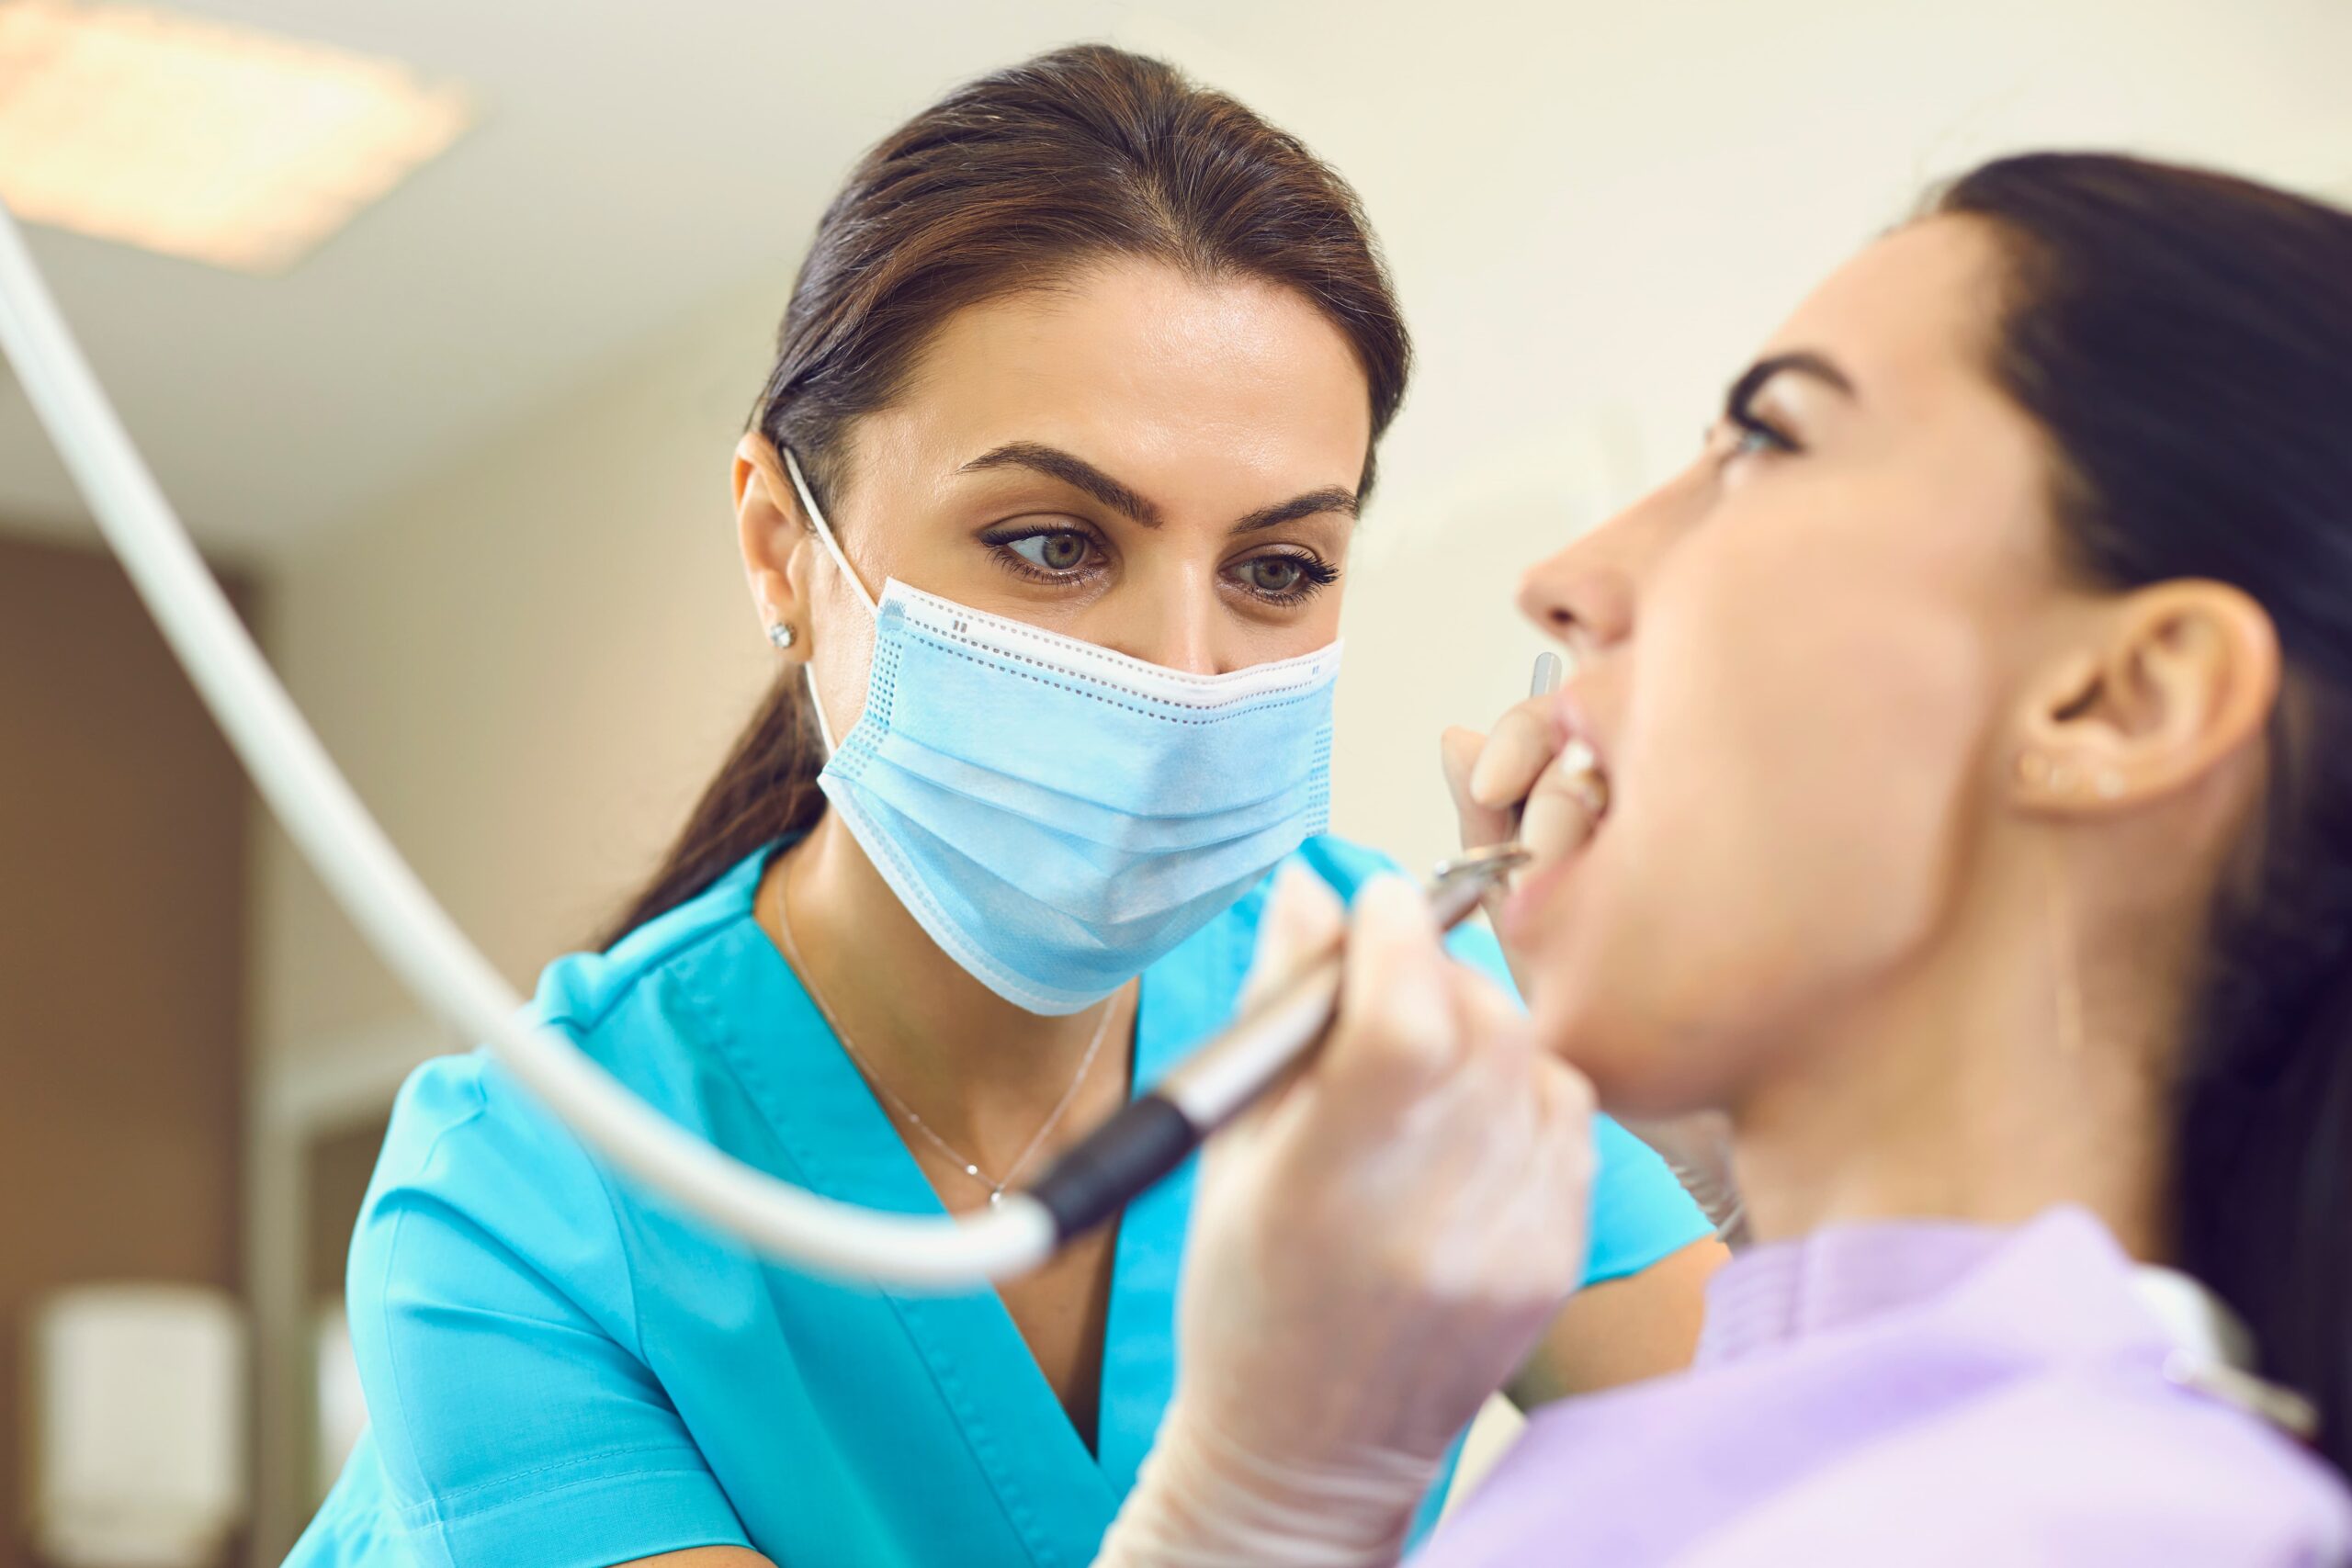 A dentist in scrubs and a blue facemask uses a tool connected to a tube on a woman sitting with her mouth open.